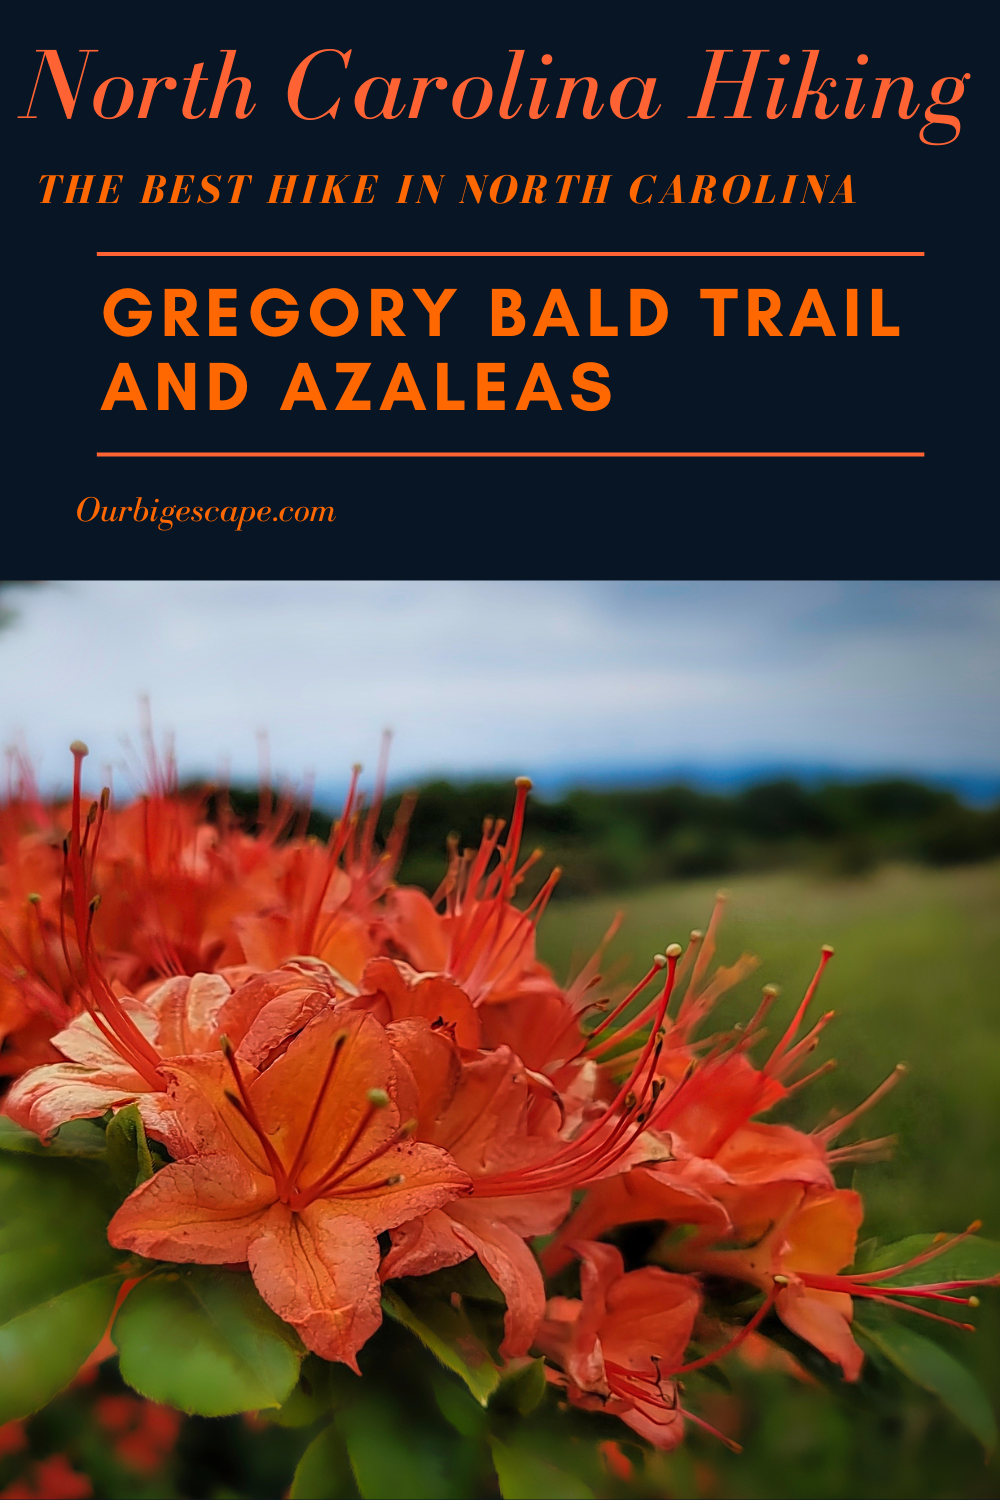 Gregory Bald Trail